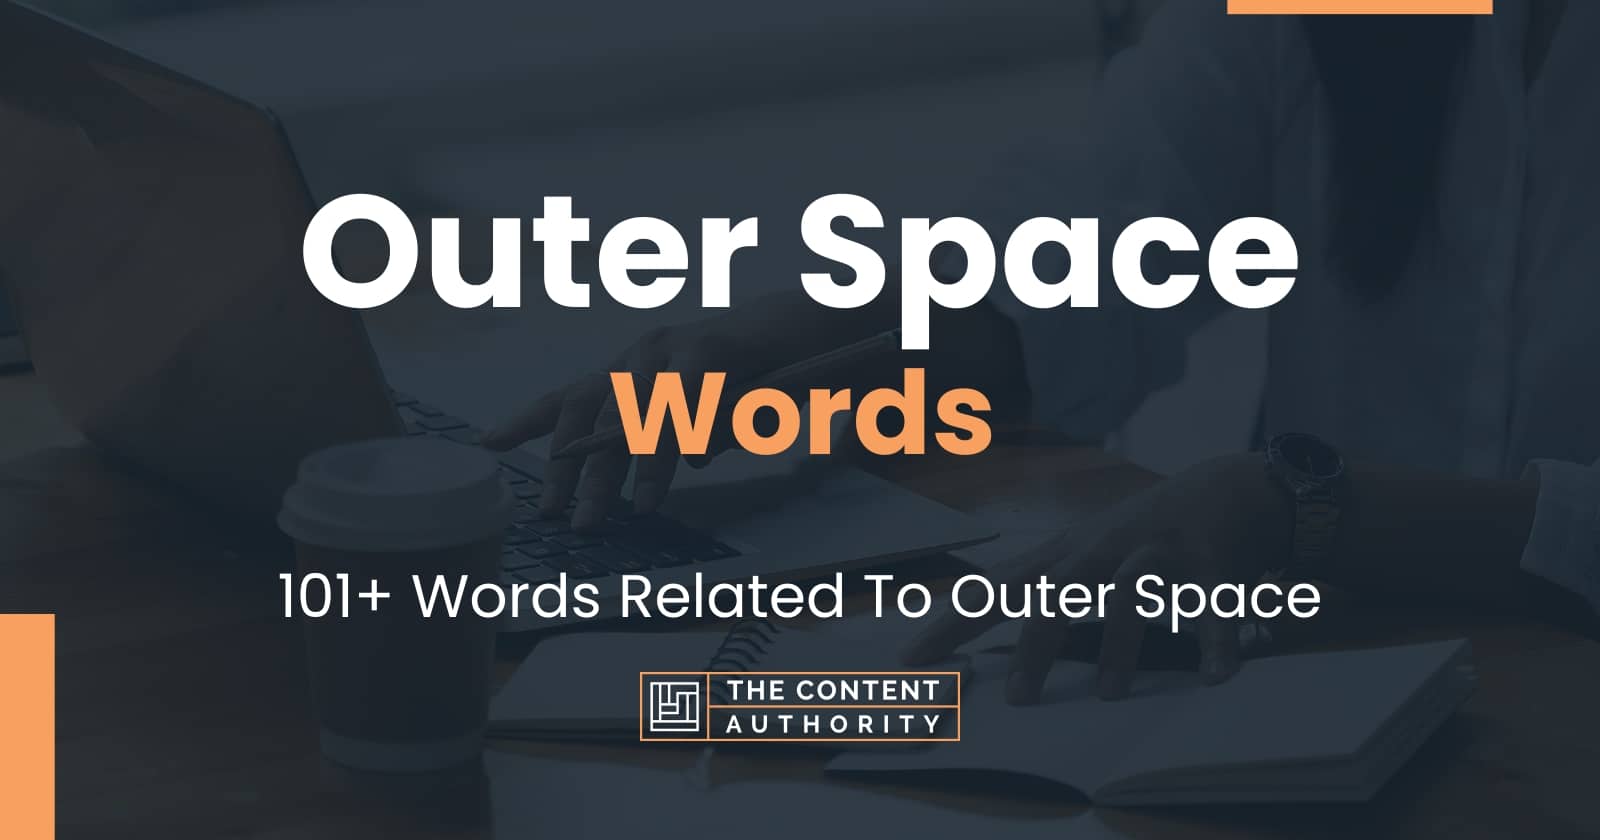 Outer Space Words 101 Words Related To Outer Space 3070